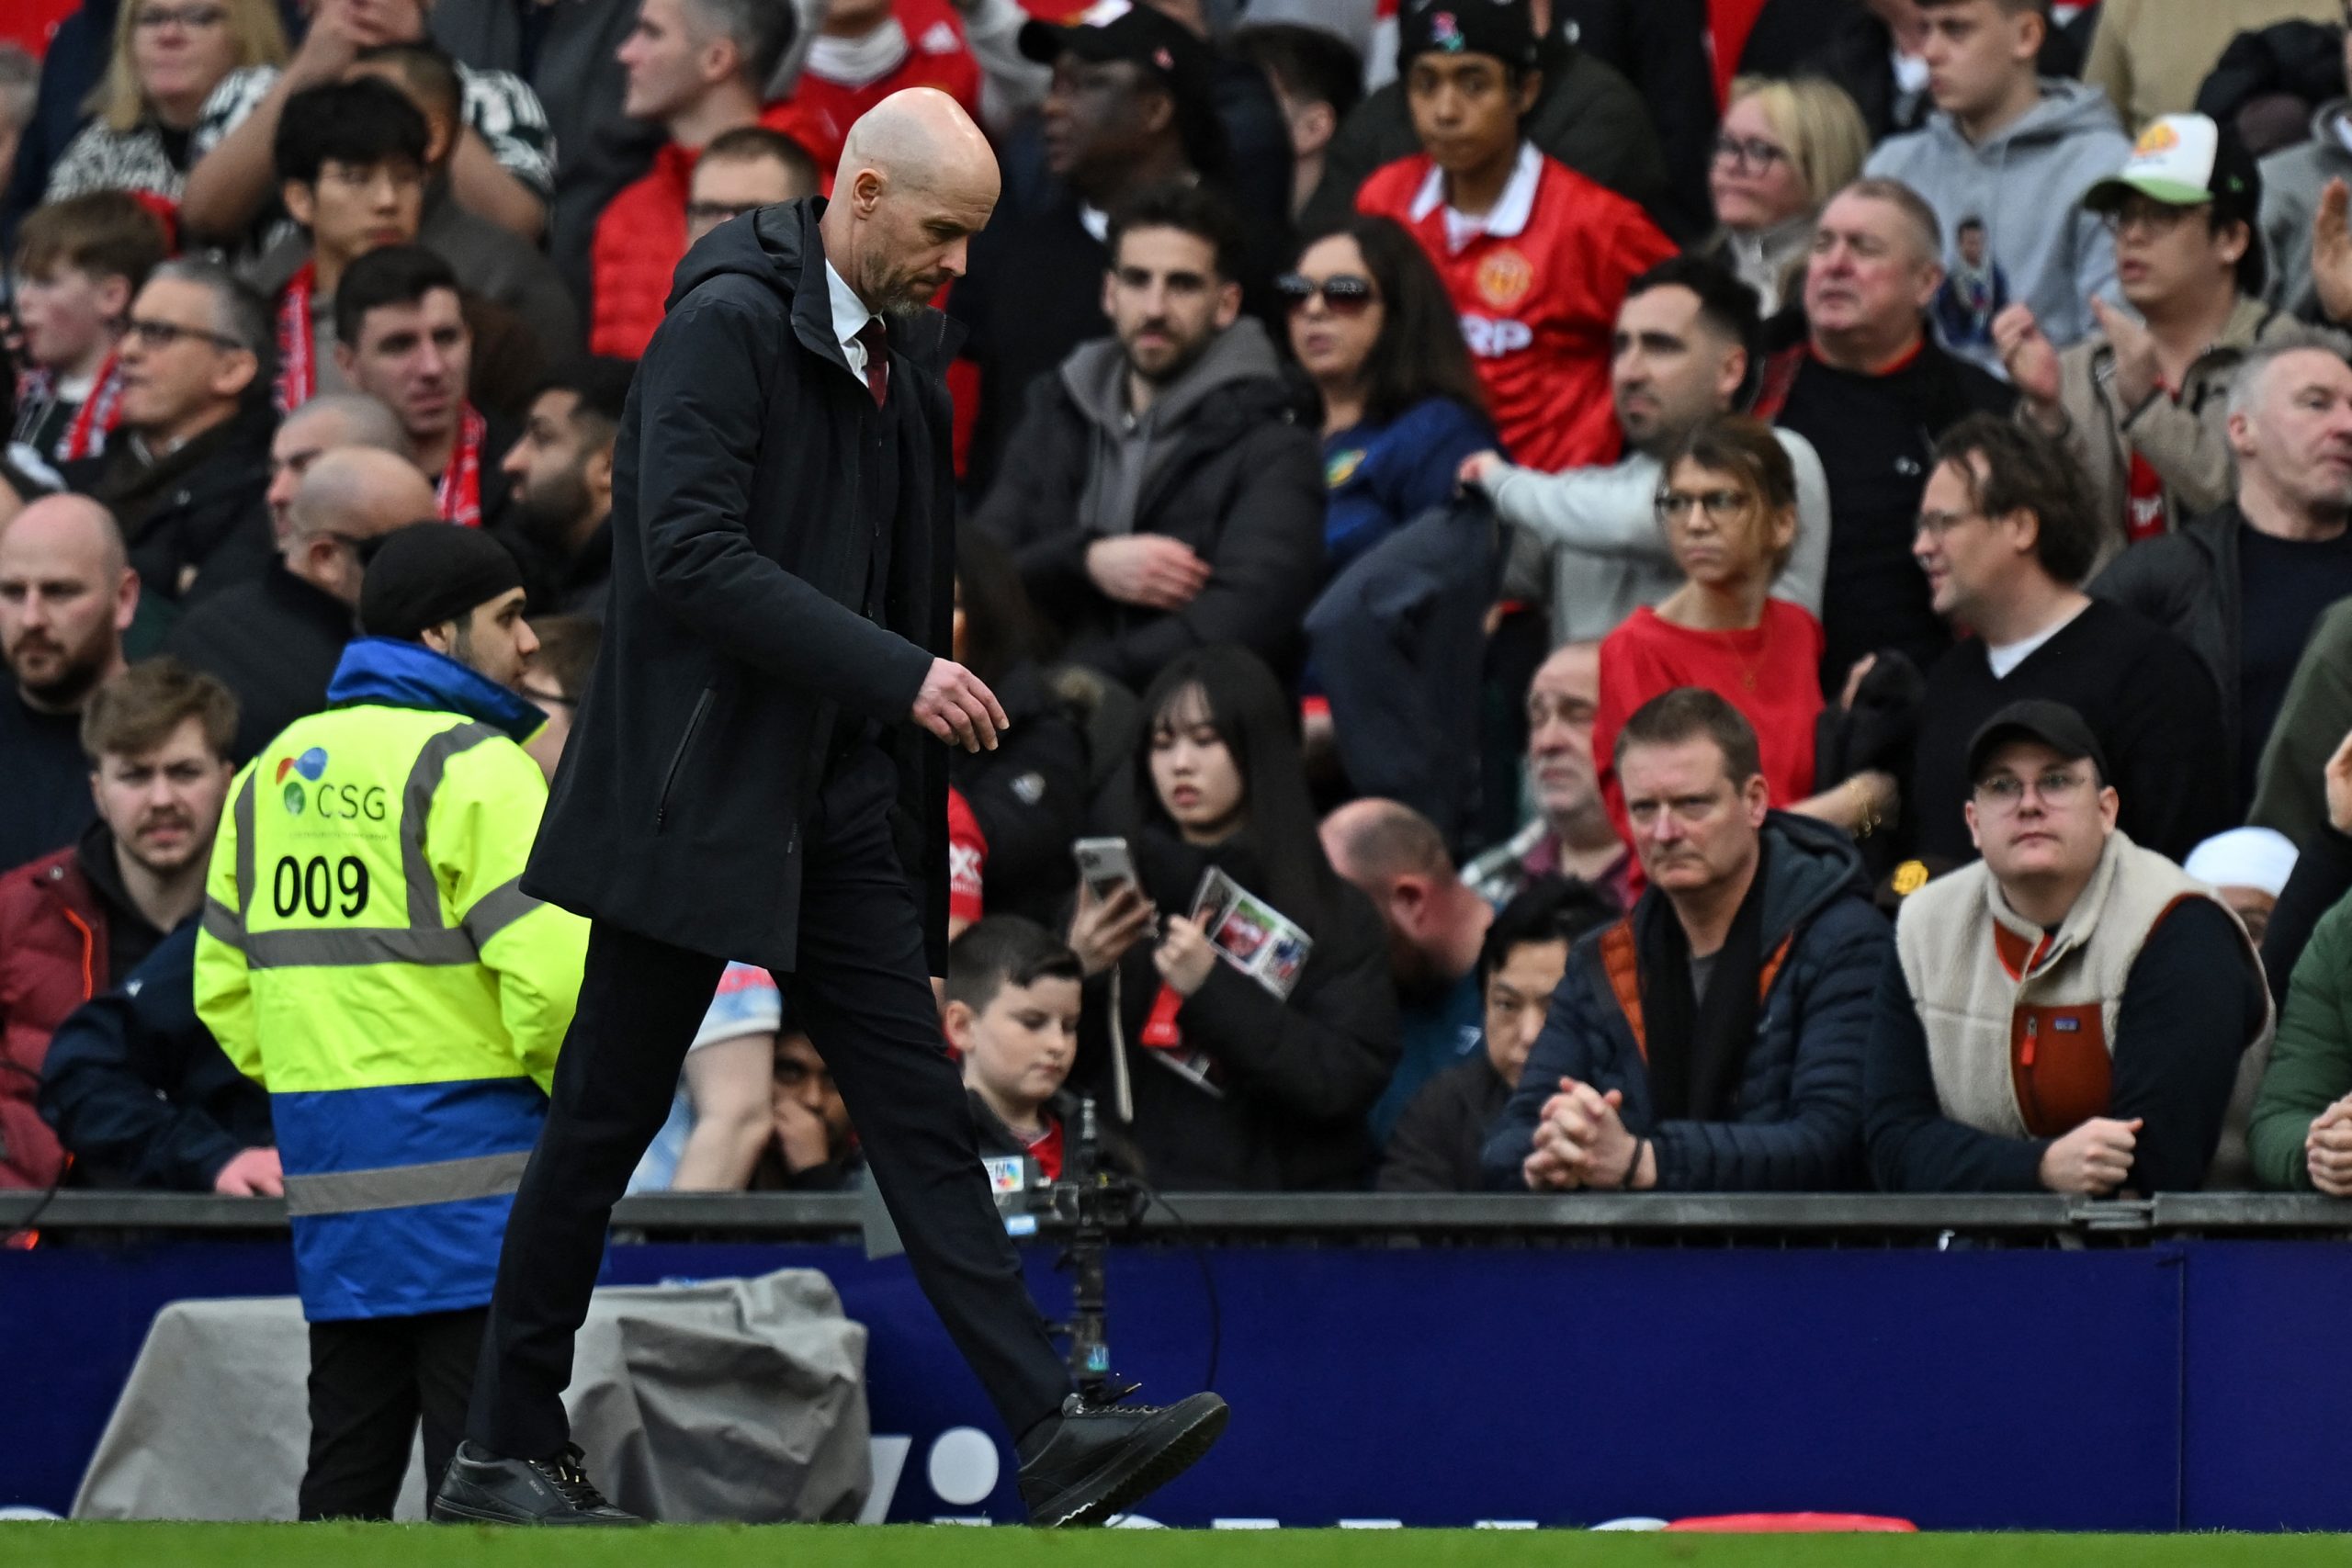 UCL winning boss interested in Manchester United job; Time up for Ten Hag?